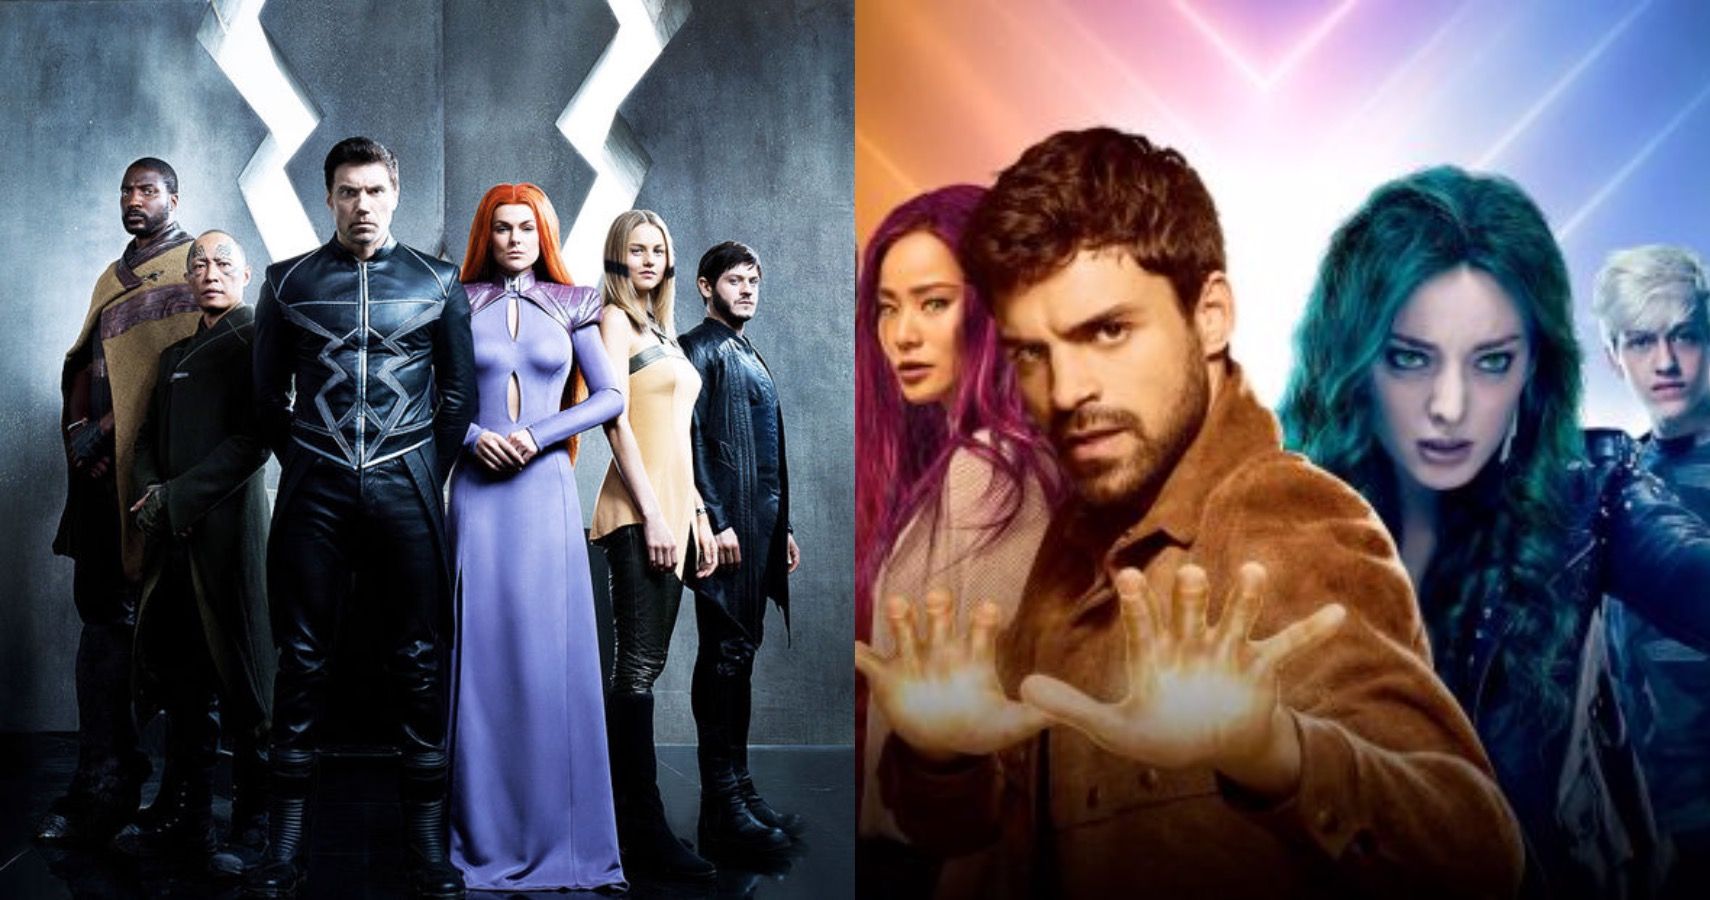 THE GIFTED Season 2 Episode 7 